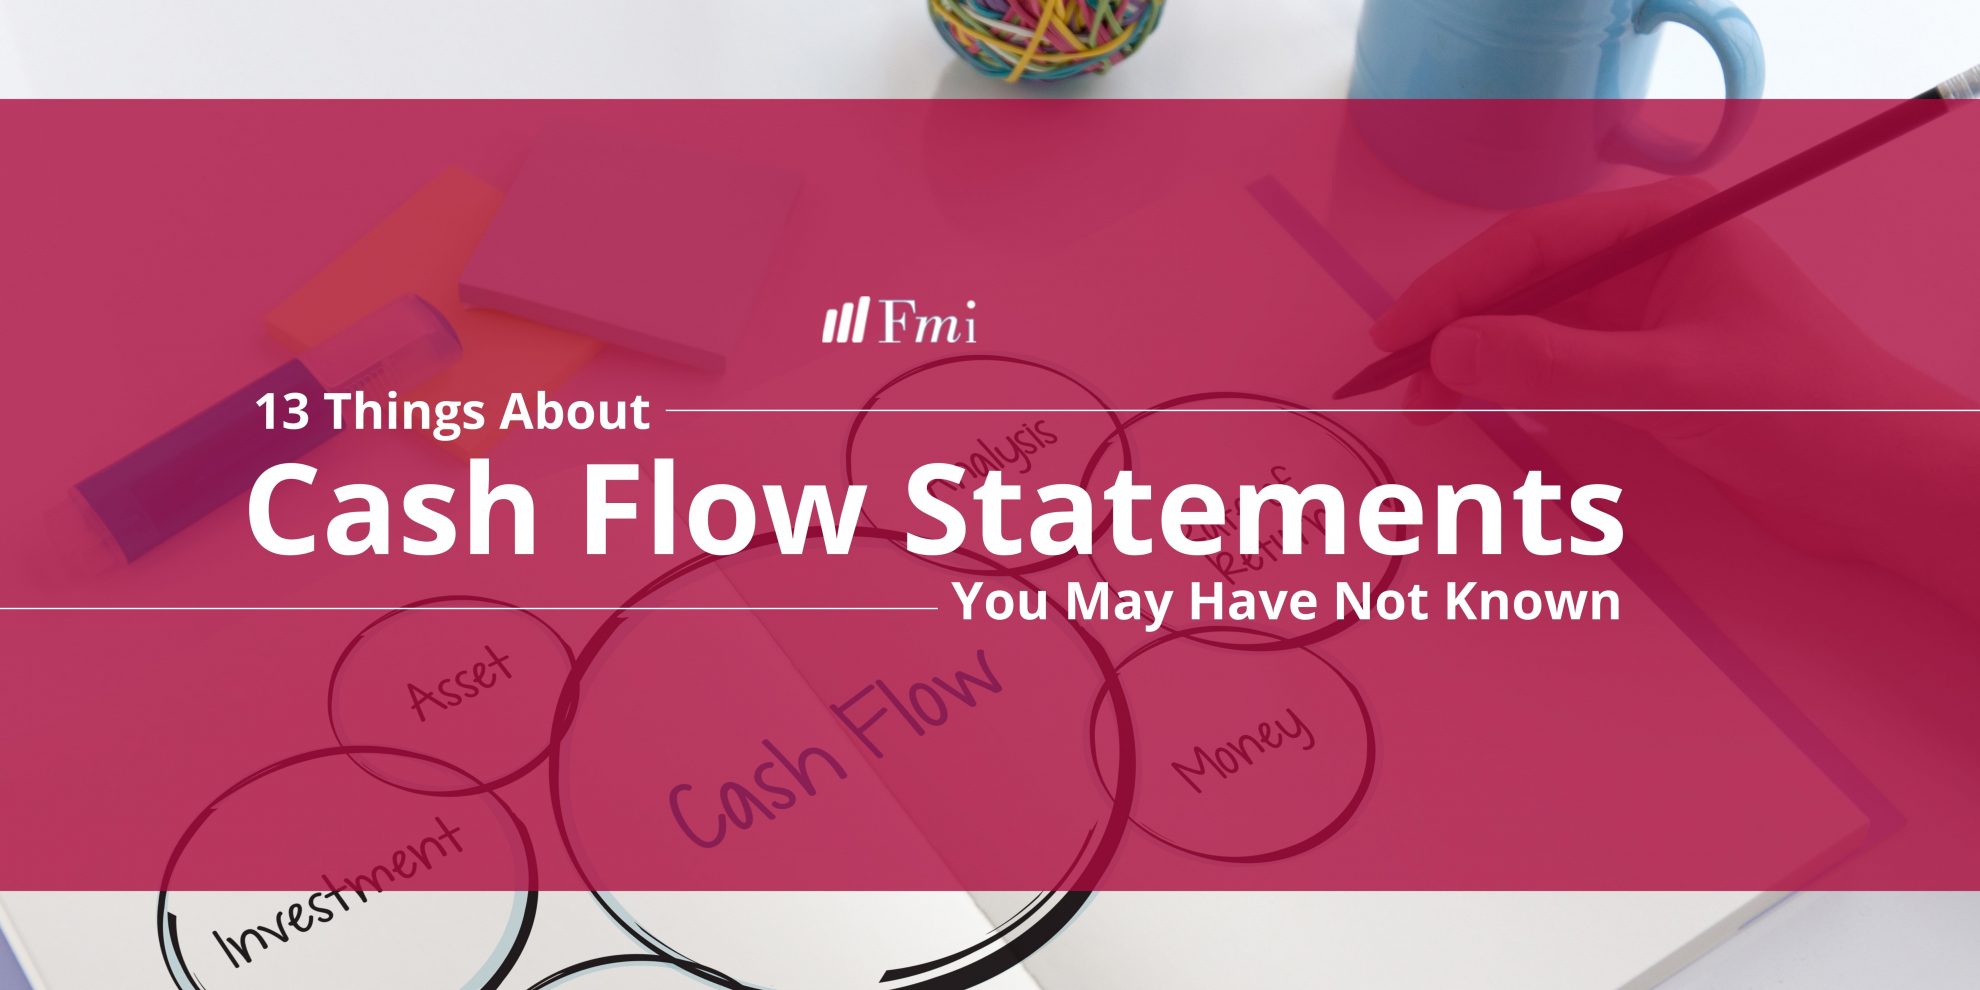 13-Things-About-Cash-Flow-Statements-You-May-Have-Not-Known-1980×990